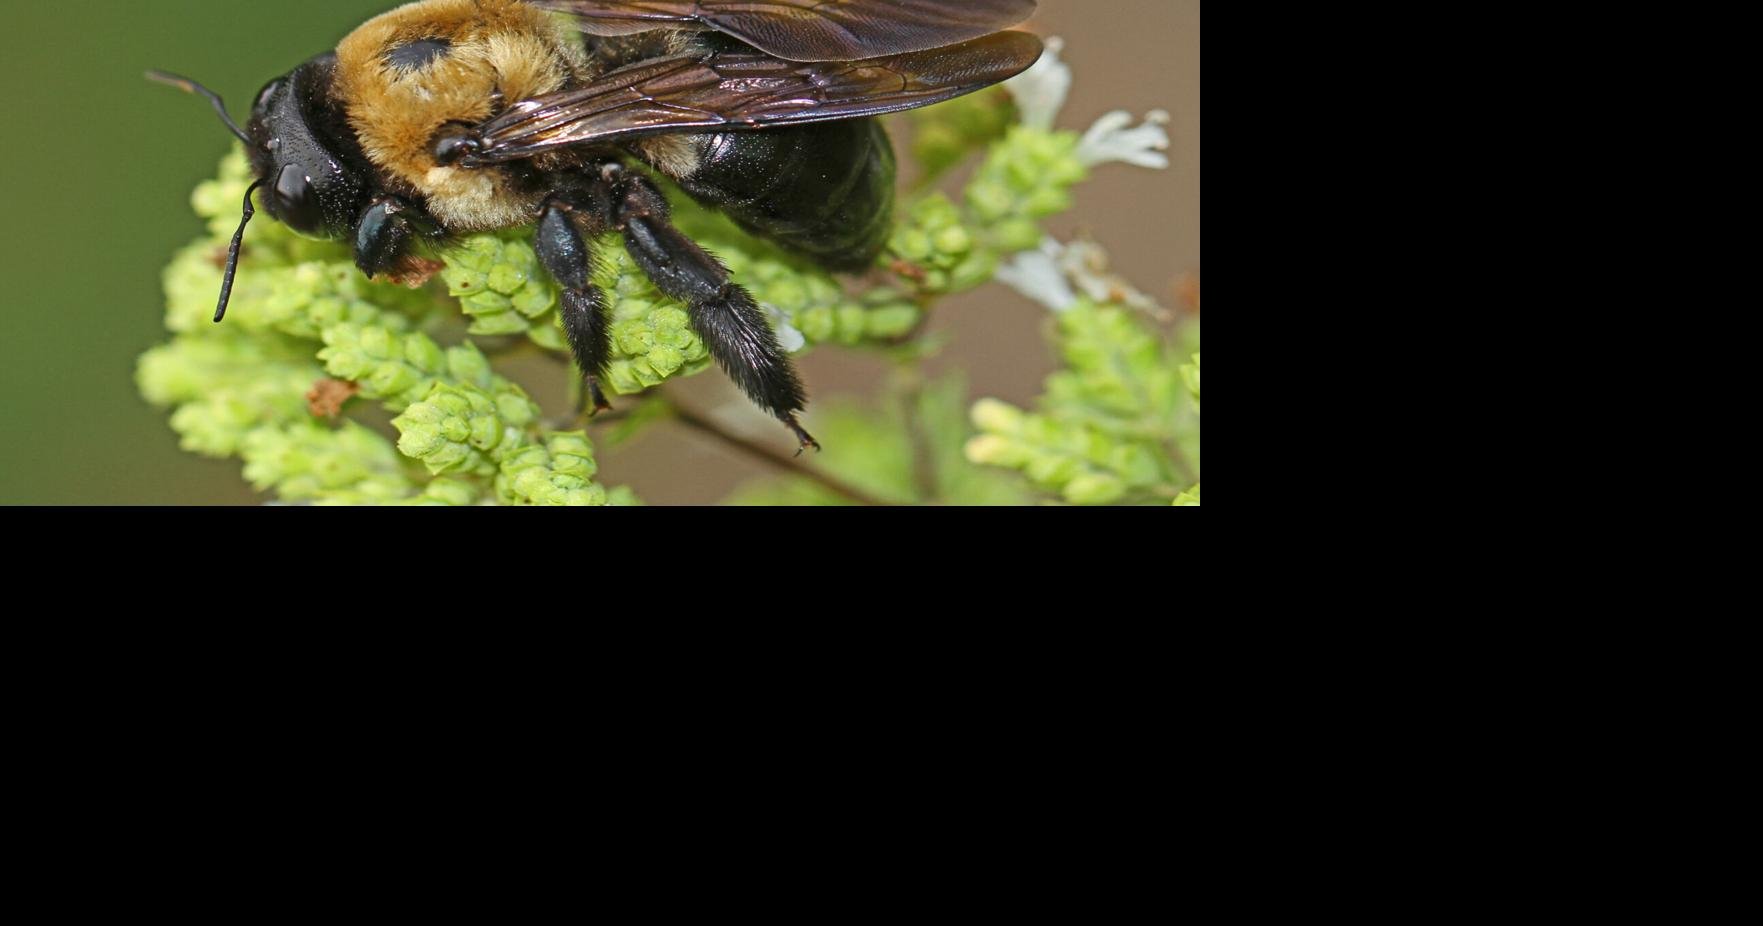 Master Gardener: Carpenter bees are great pollinators with a mixed reputation